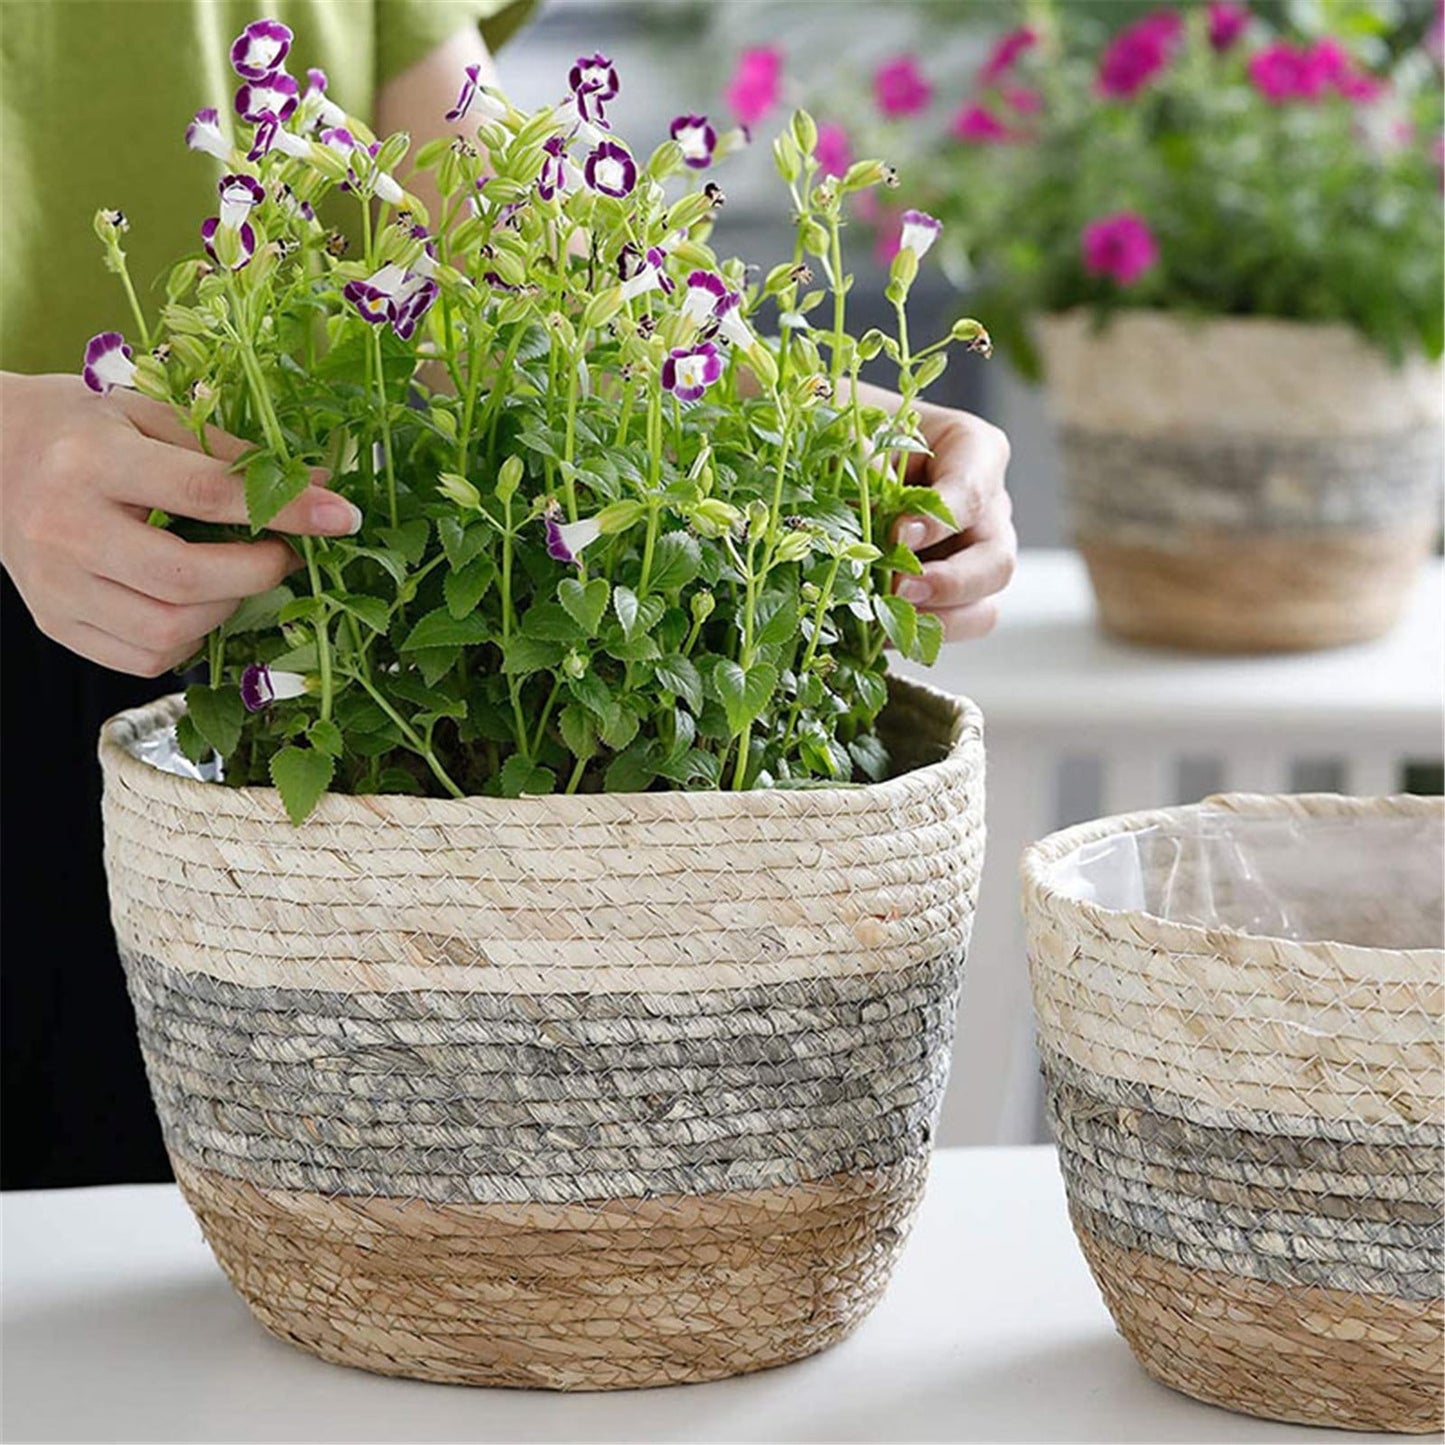 Bidobibo Basket Planters ,Geometry Planter Flower Pot Indoor and Outdoor Modern Decorative Garden Pot with Drainage Hole for All House Plants, Flowers, Herbs,Large size: 22x15x14cm/8.7x5.9x5.5inch